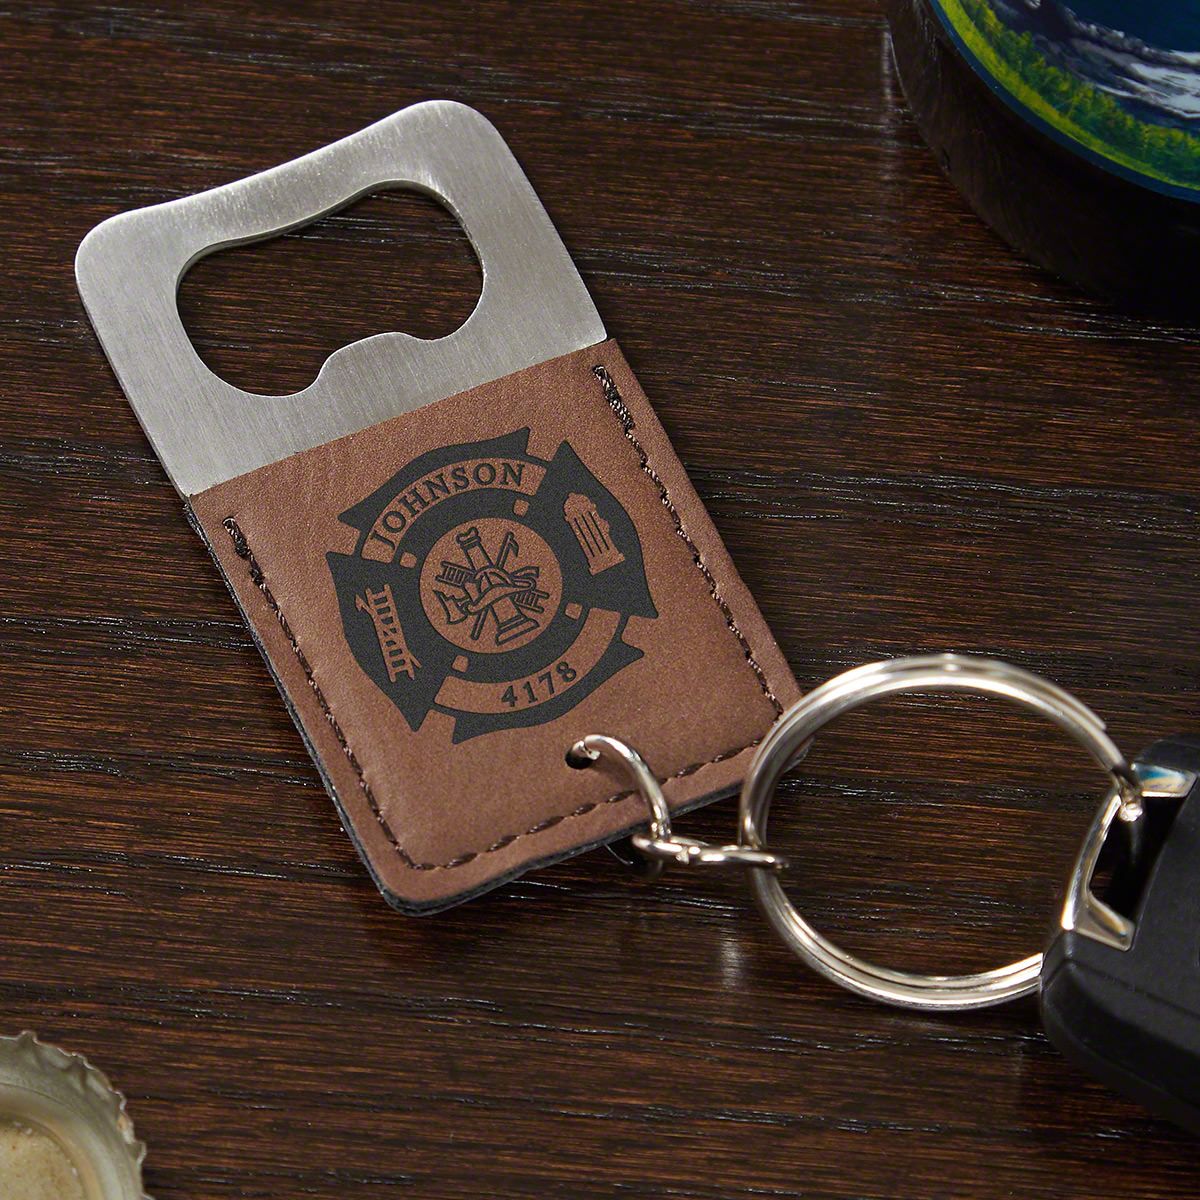 KEY CHAIN WITH BOTTLE OPENER AND TWIST OFF CAP ALSO 